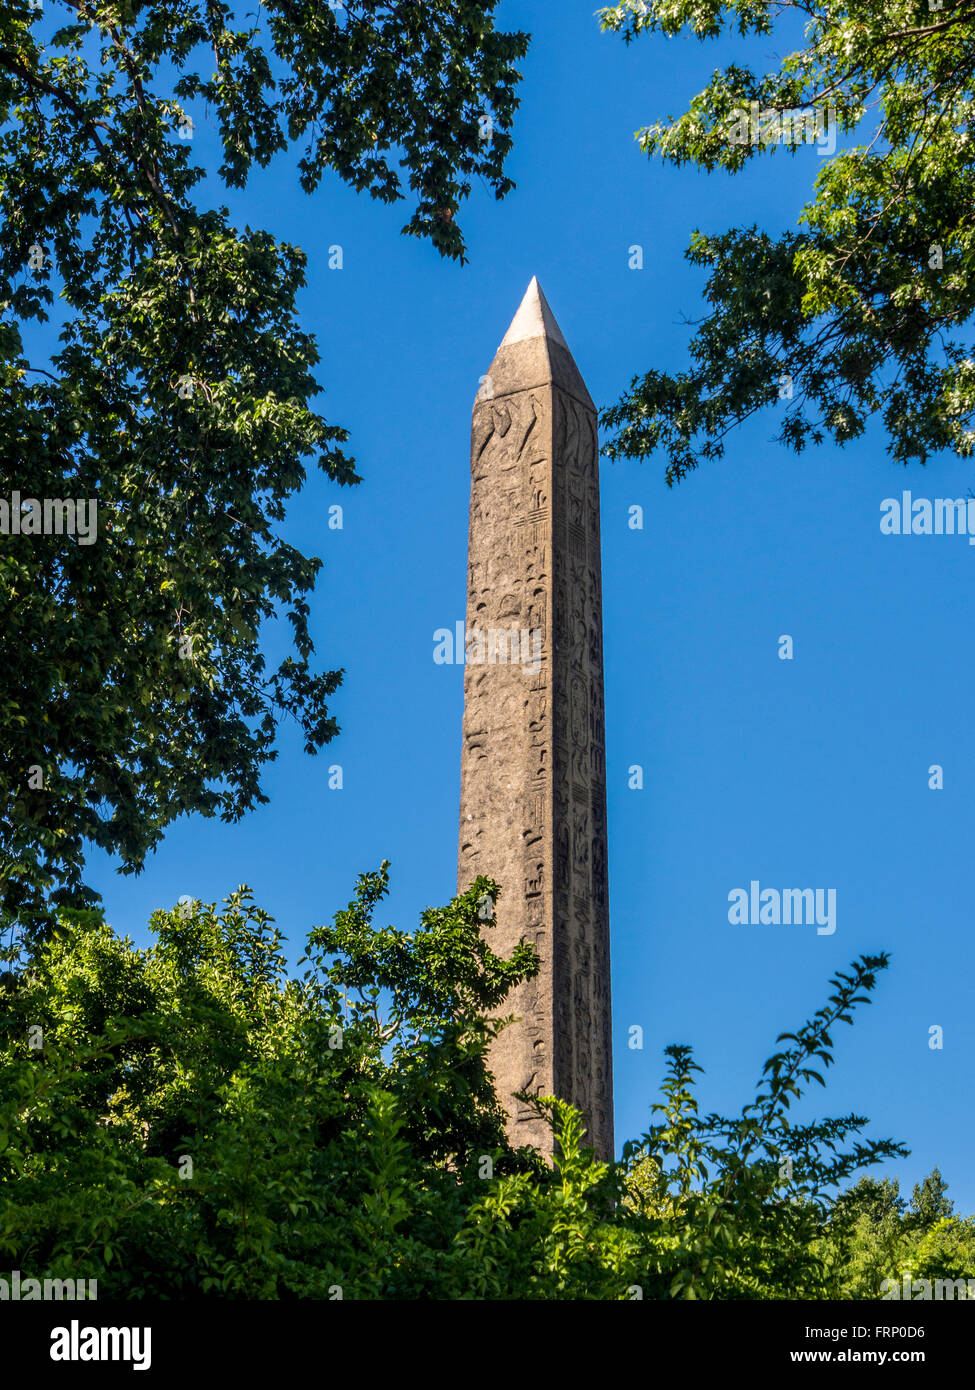 The Obelisk (Cleopatra’s Needle) The oldest man-made object in Central Park, and the oldest outdoor monument in New York. Stock Photo